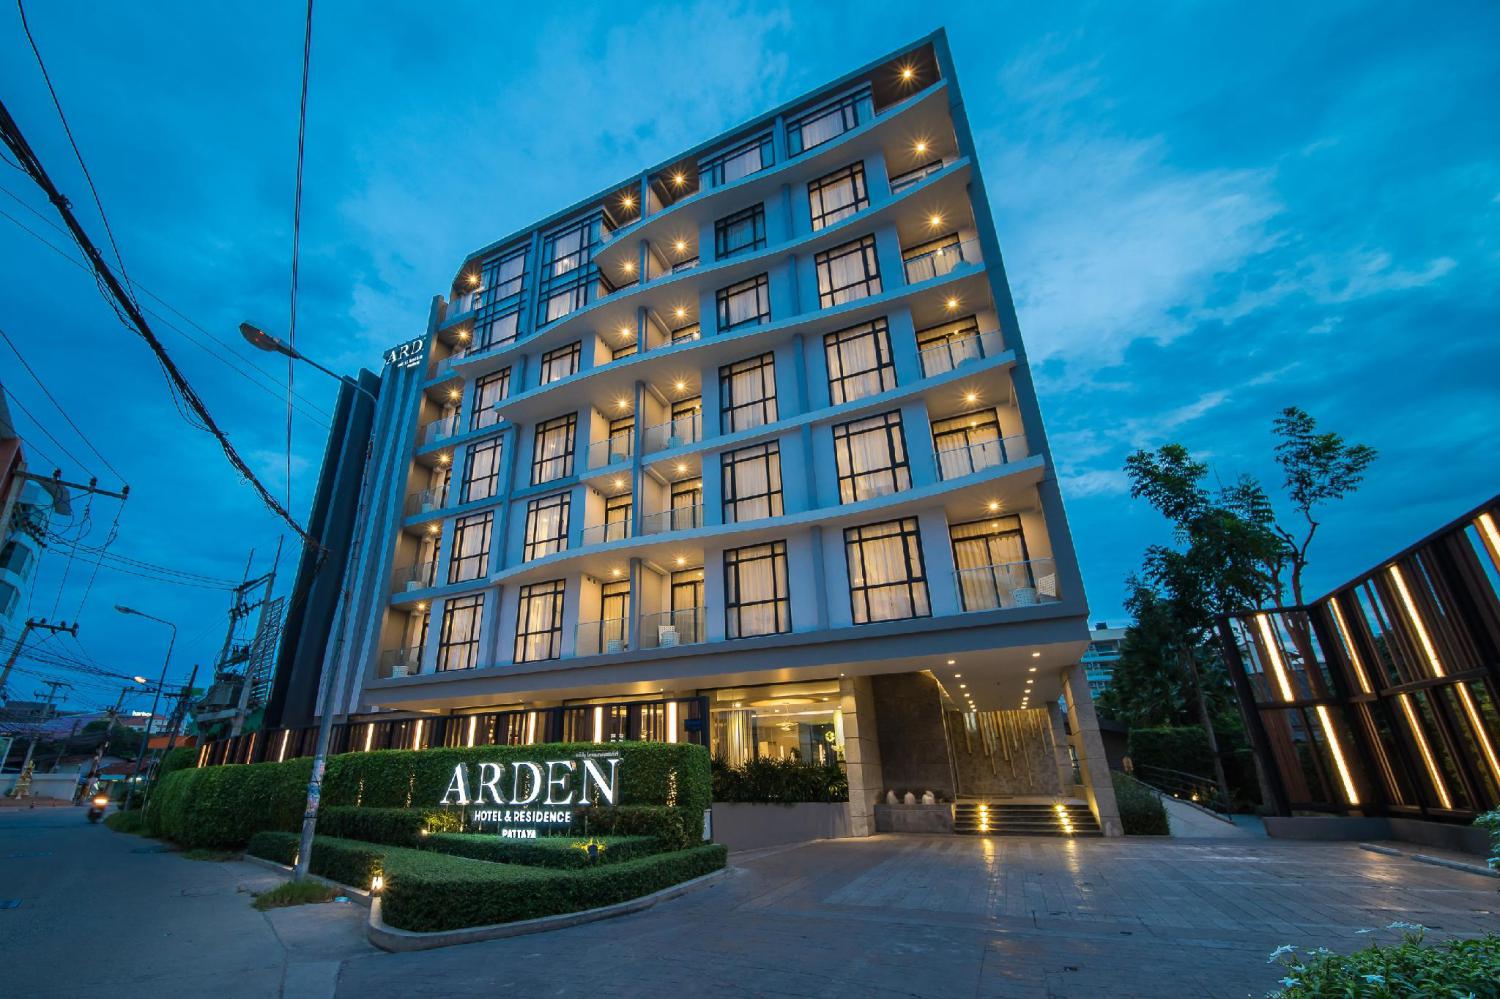 Arden Hotel and Residence - Image 5